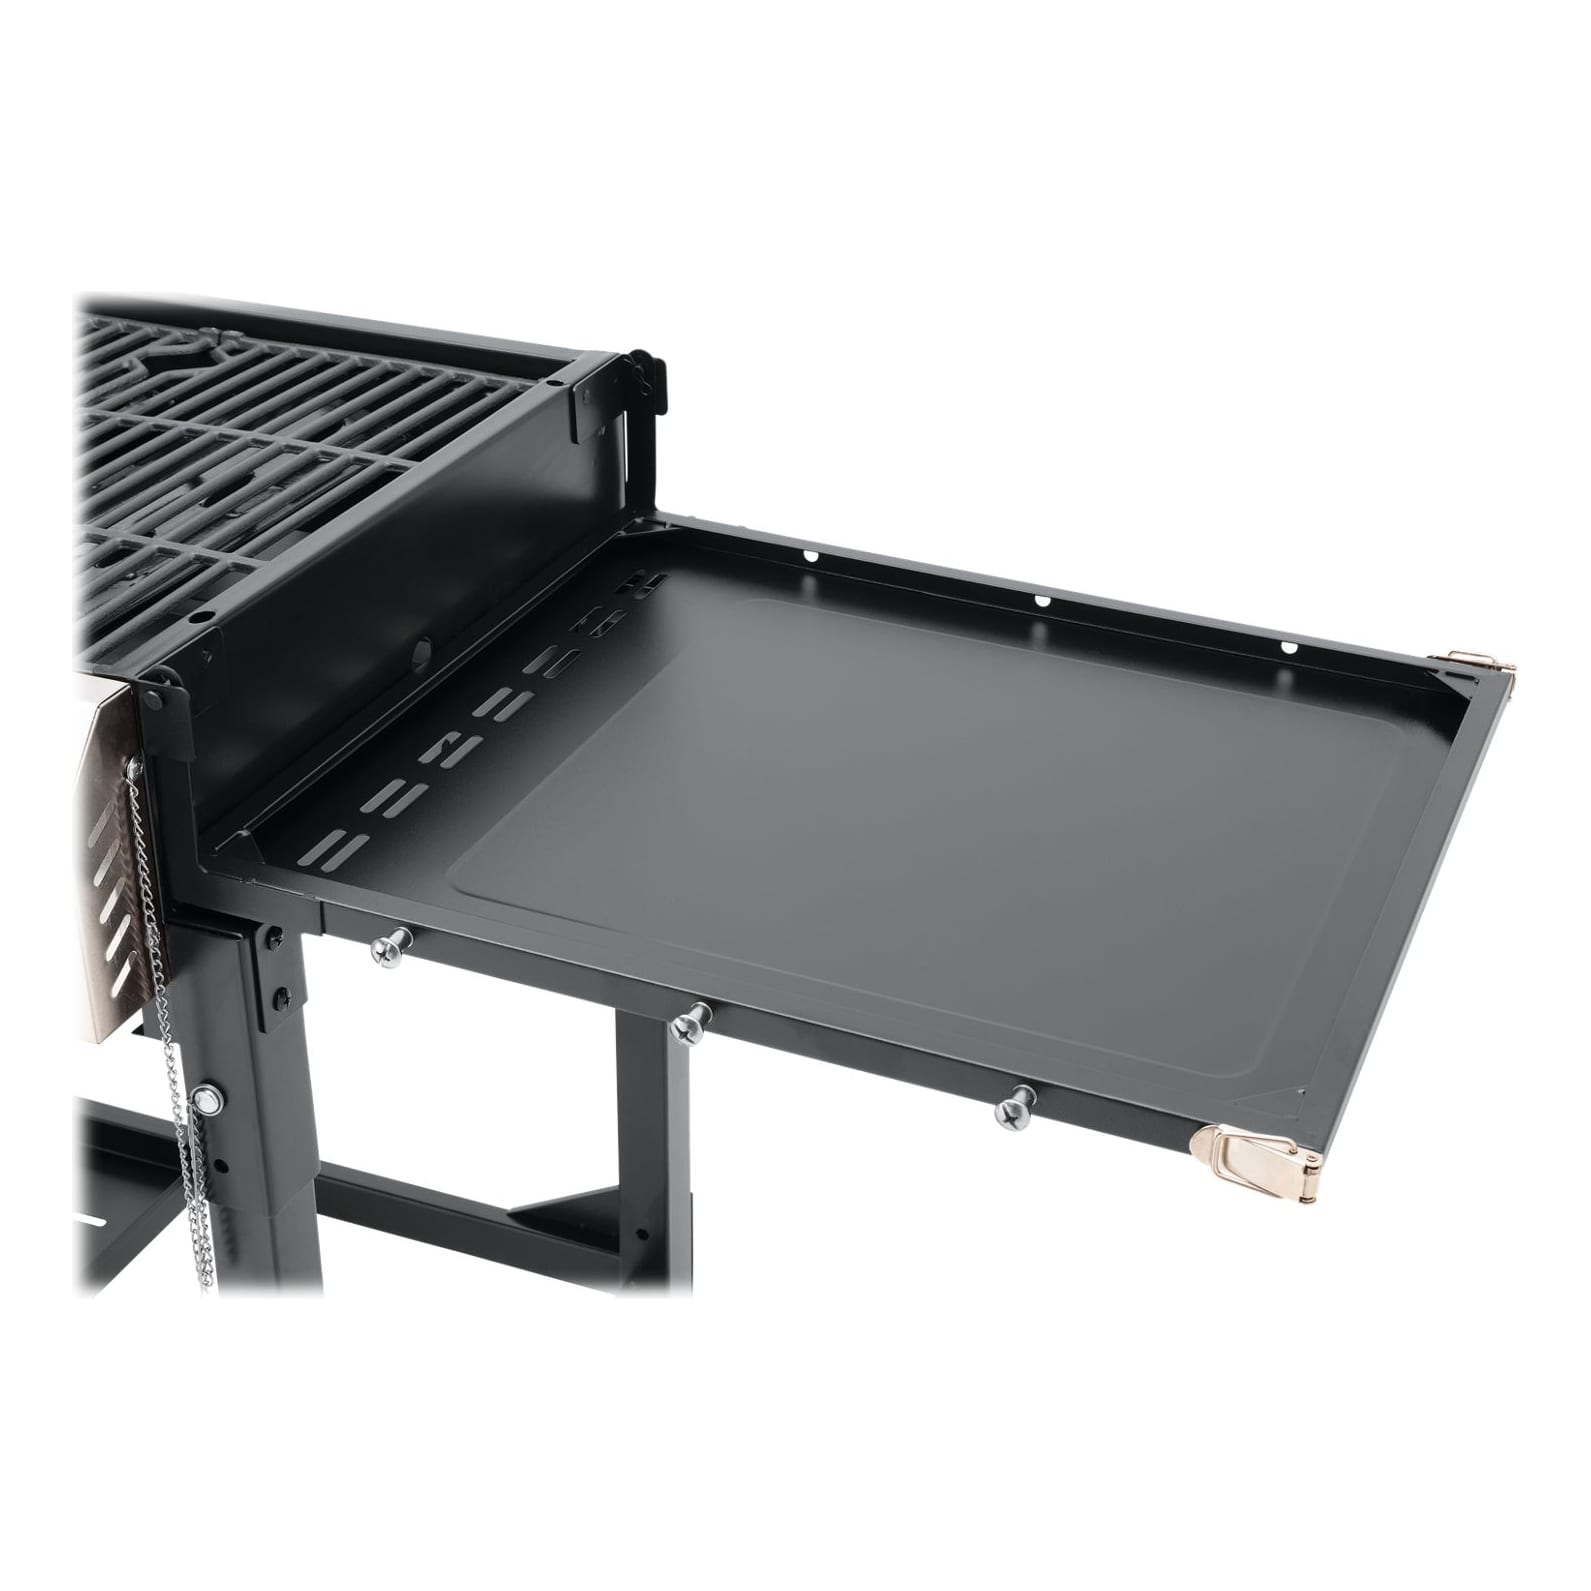 Cabela's® Deluxe 4-Burner Event Grill